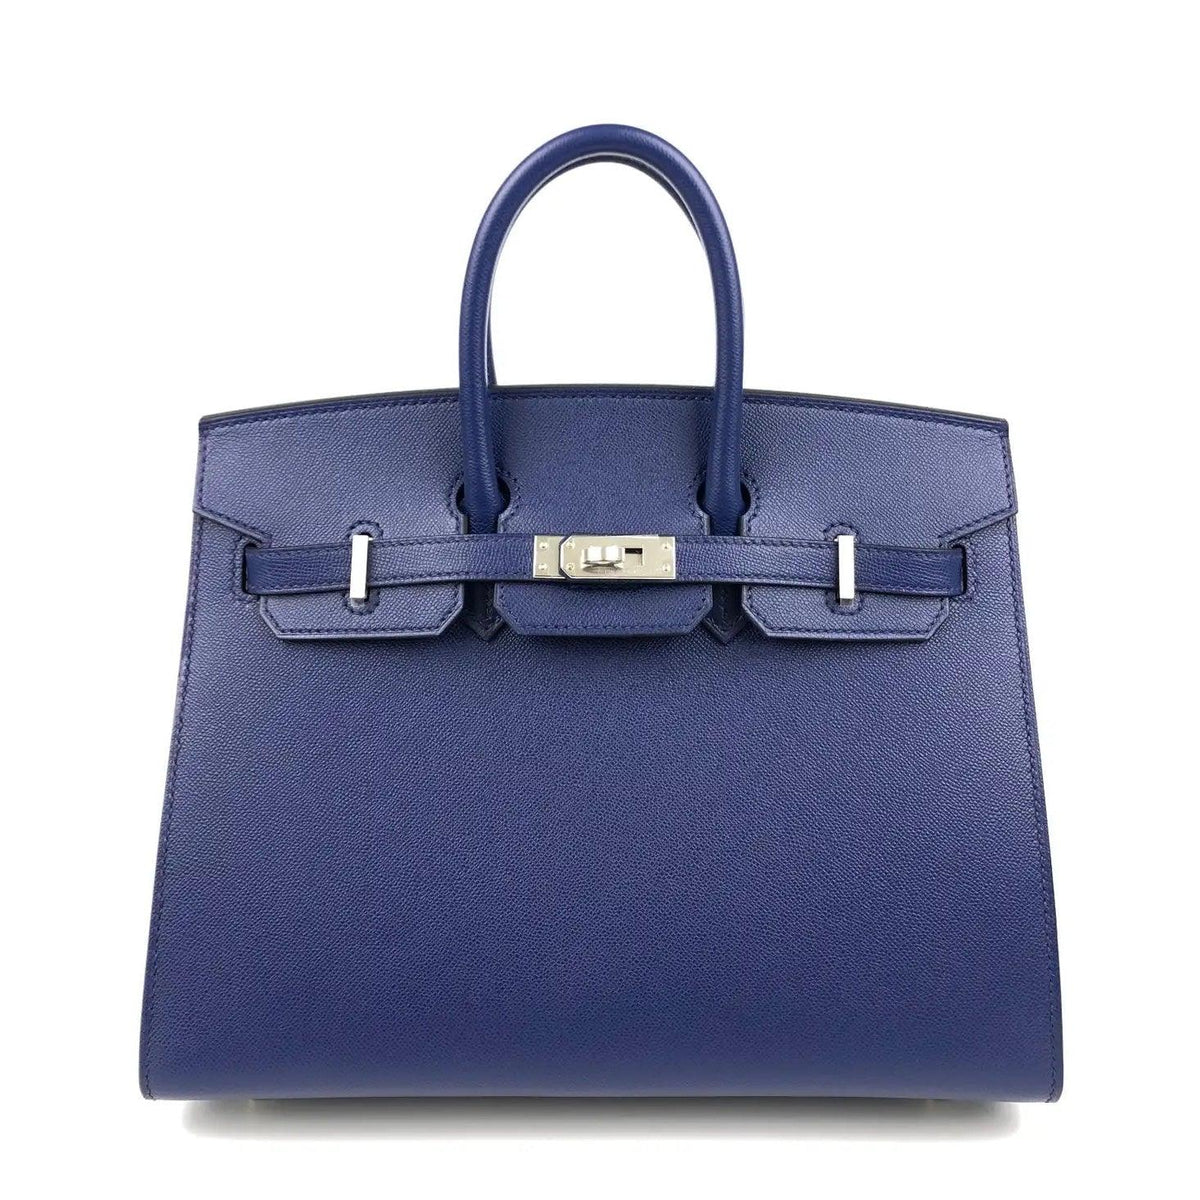 Pre-owned HERMES Birkin 25 Sapphire Blue Sellier Madame Leather Bag - theREMODA